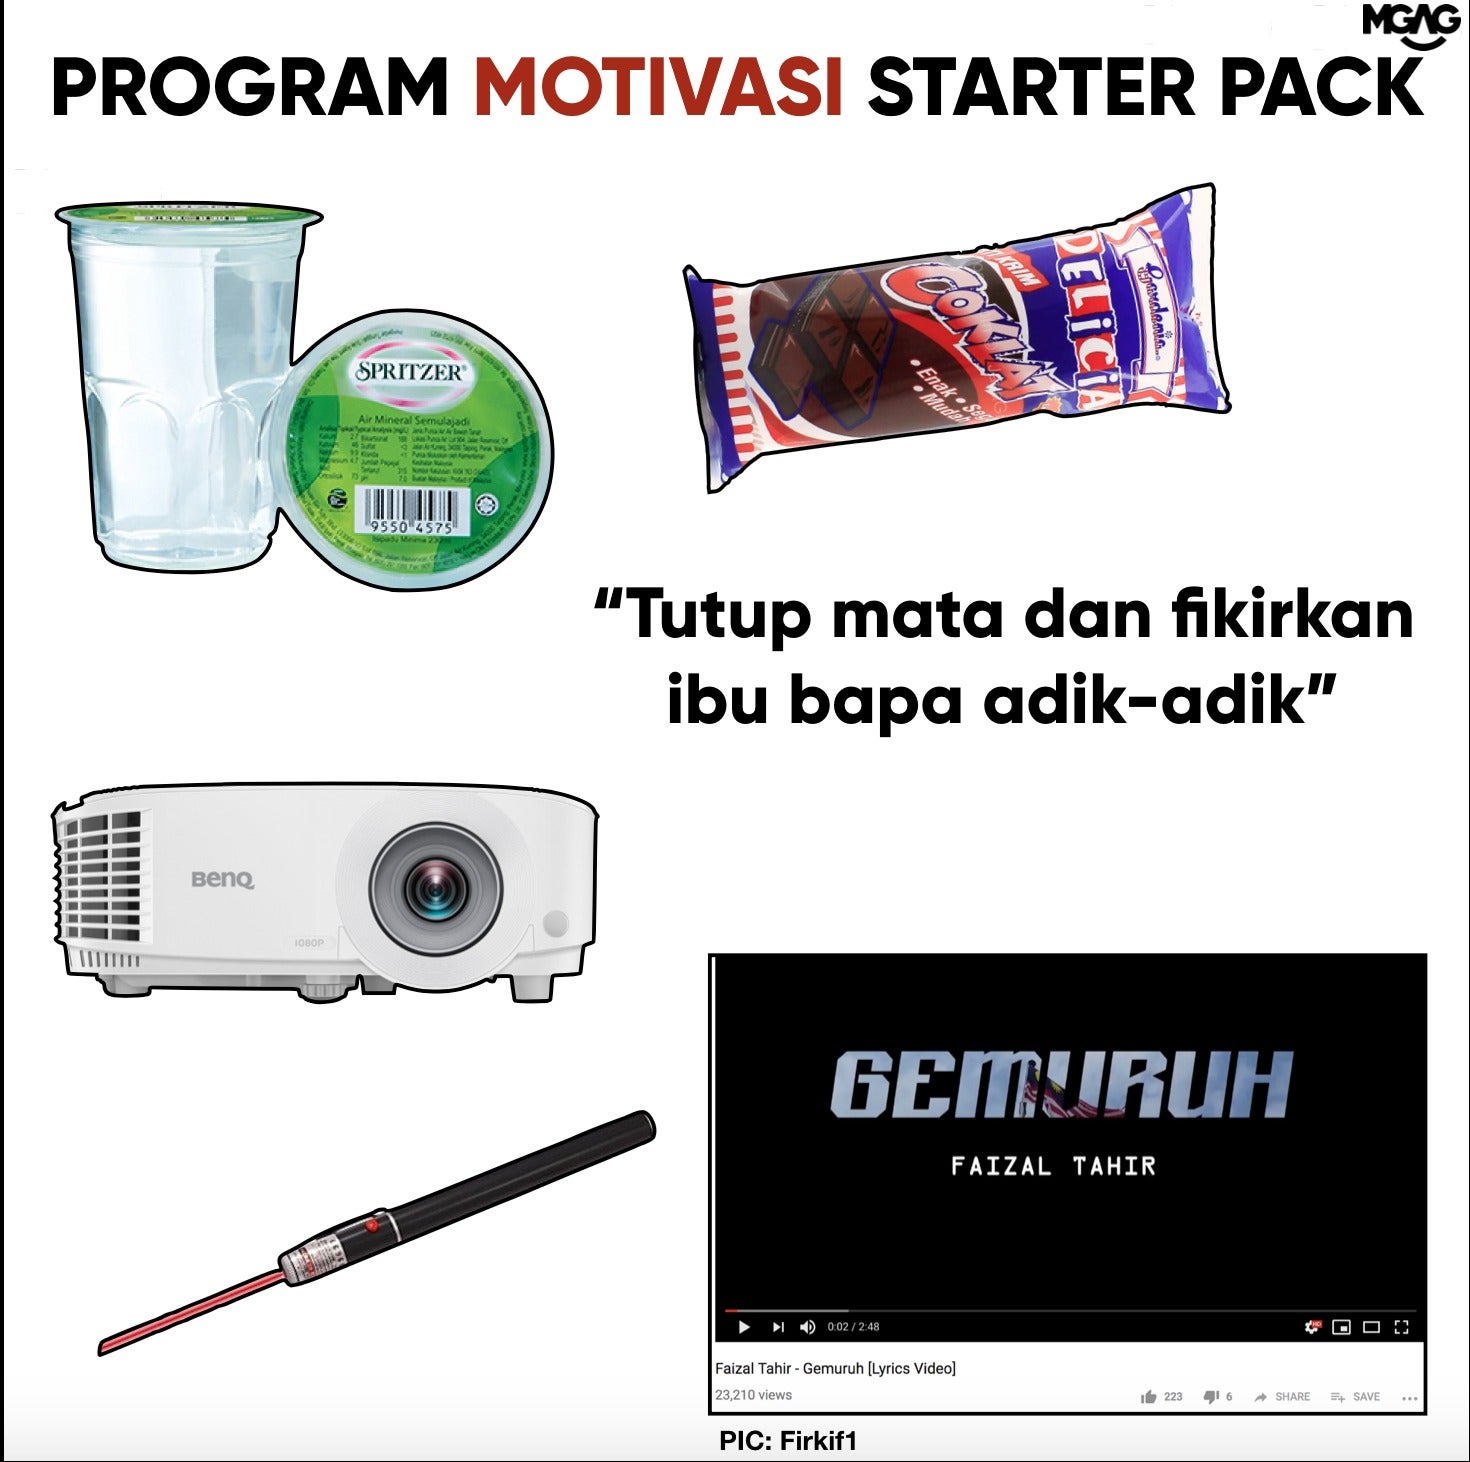 Does Anyone Remember The 'Kem Motivasi' We Had At School? - World Of Buzz 1